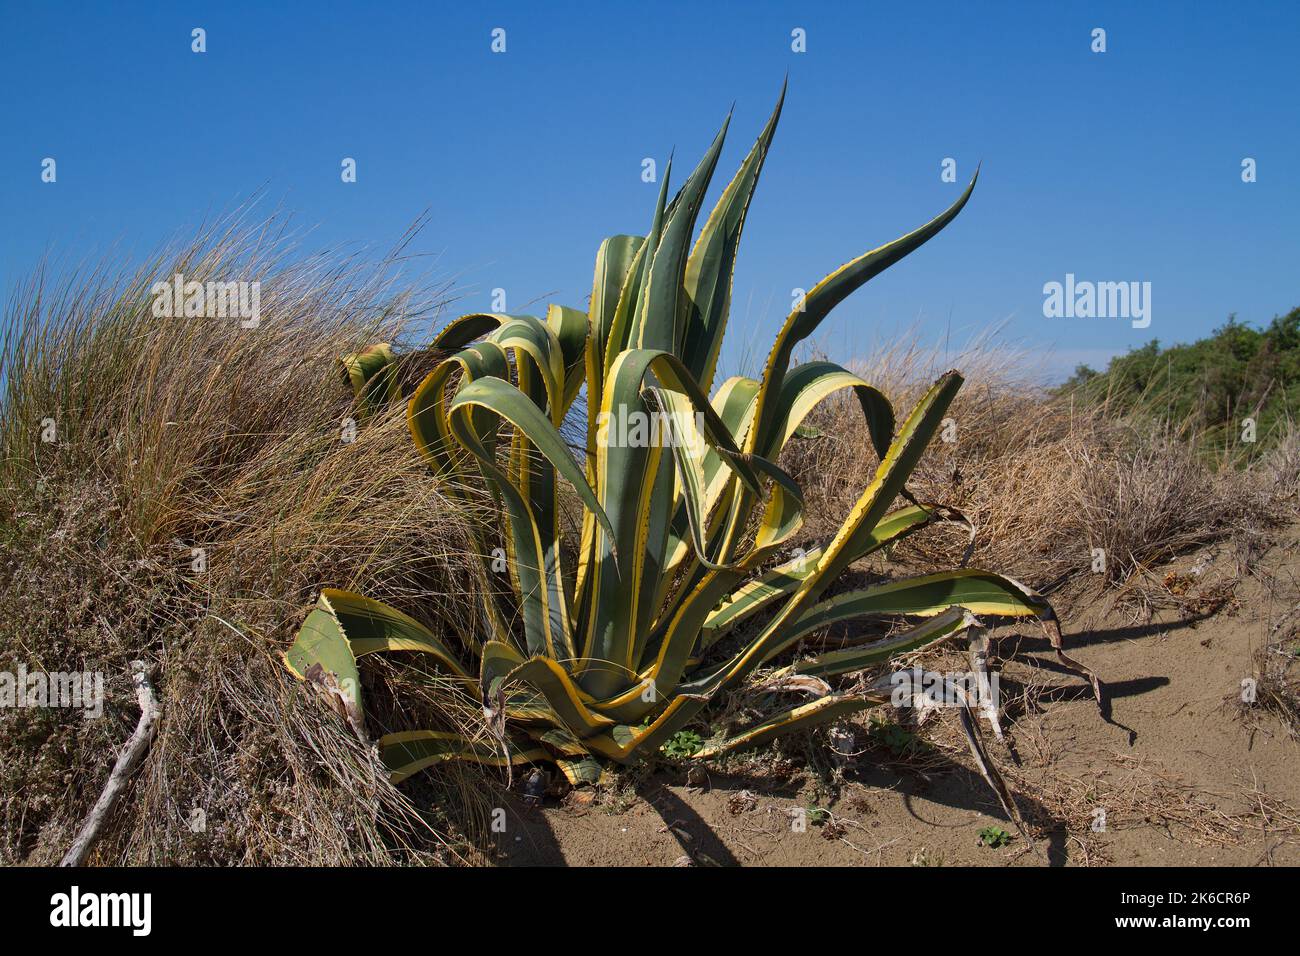 Century plant, also known as Mague, growing in the dunes of Italy Stock Photo